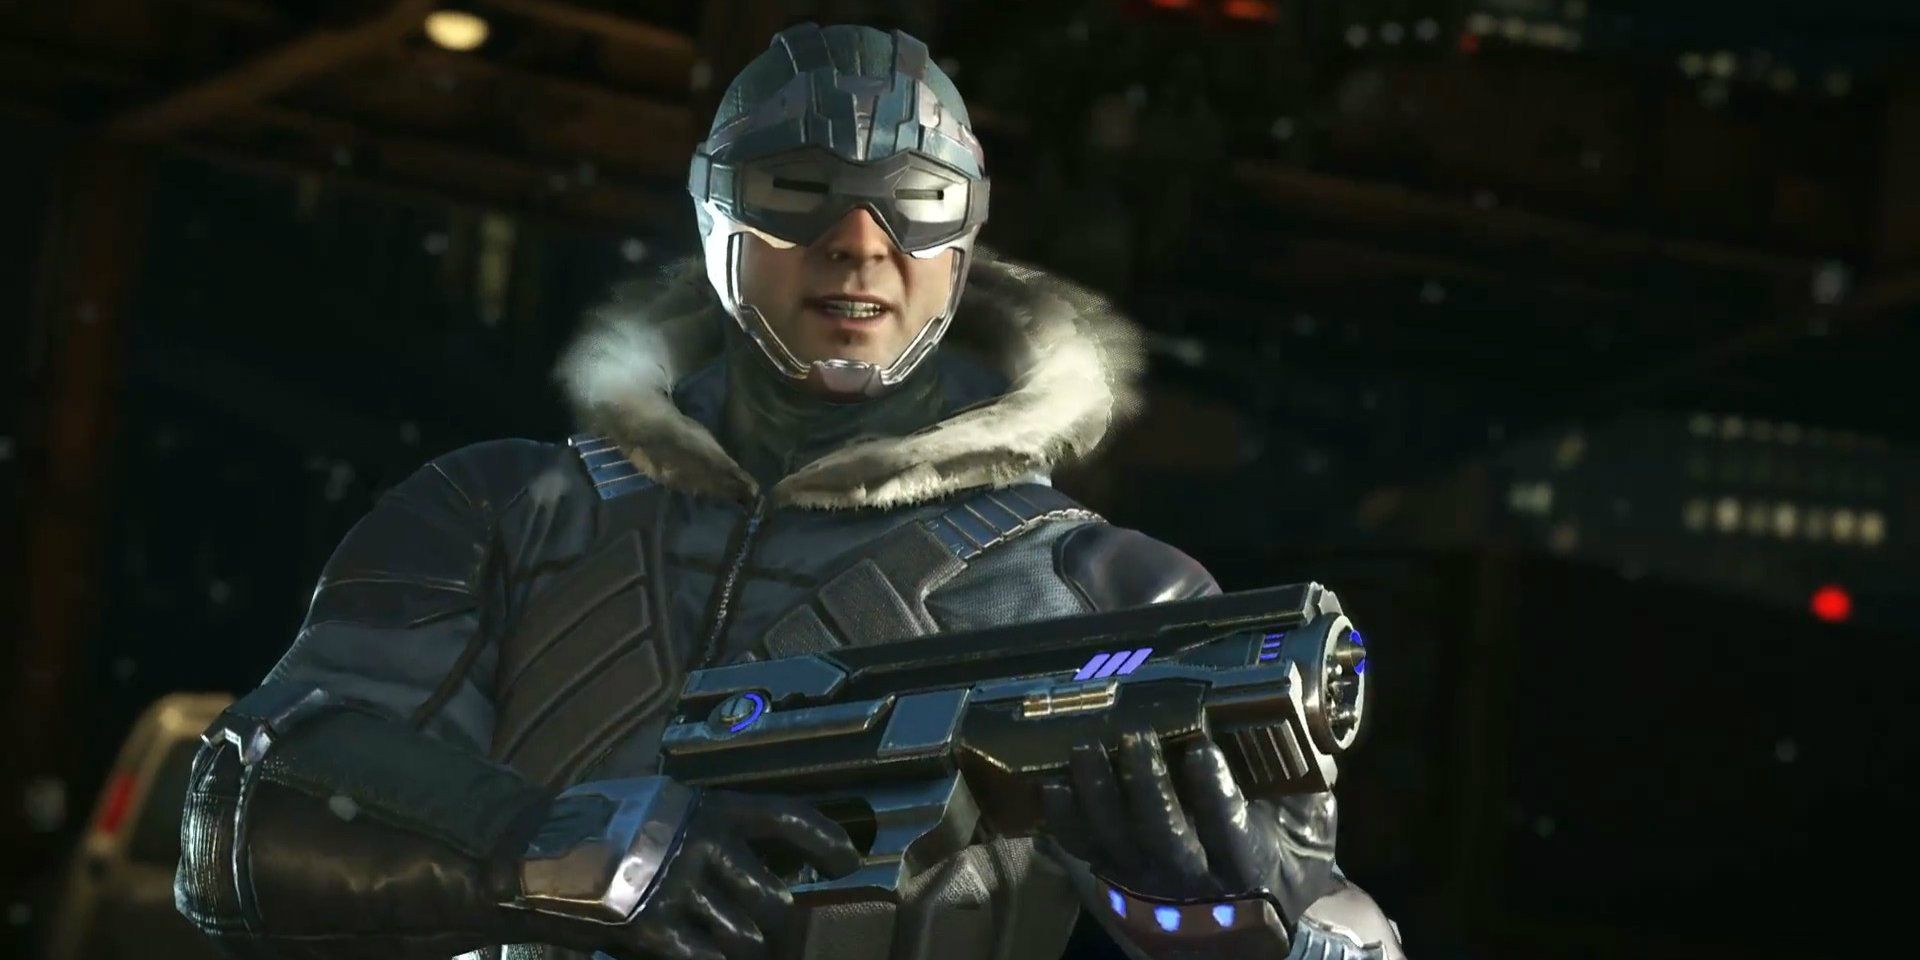 Captain Cold pointing his gun at someone in Injustice 2